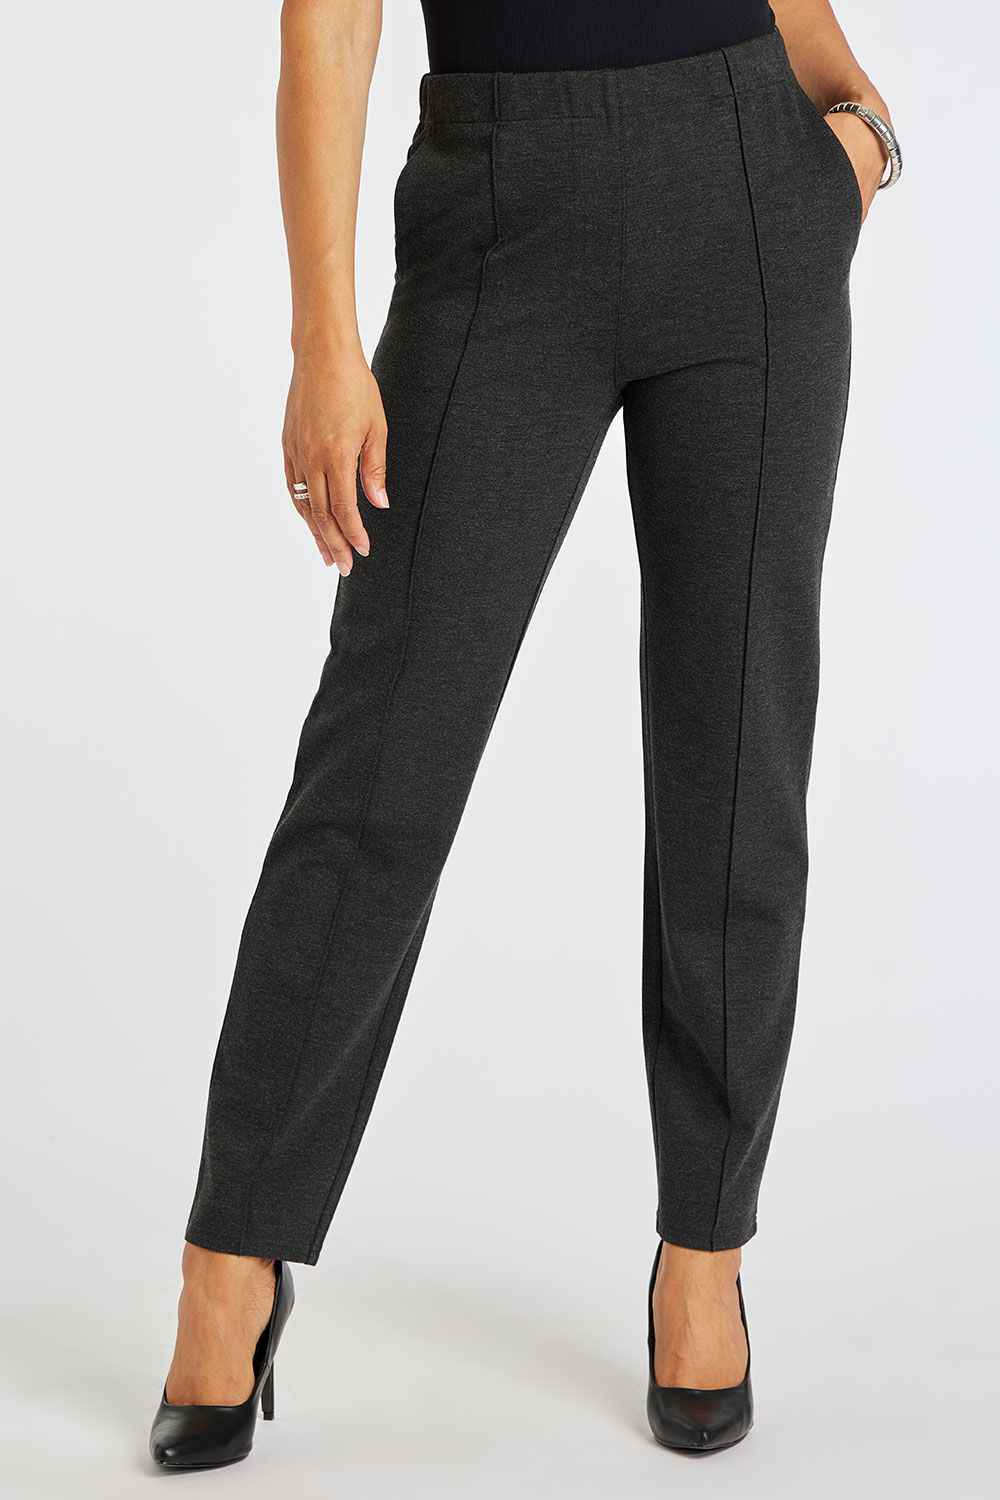 Bonmarche Grey Pleat Front Jersey Marl Tapered Leg Elasticated Trousers